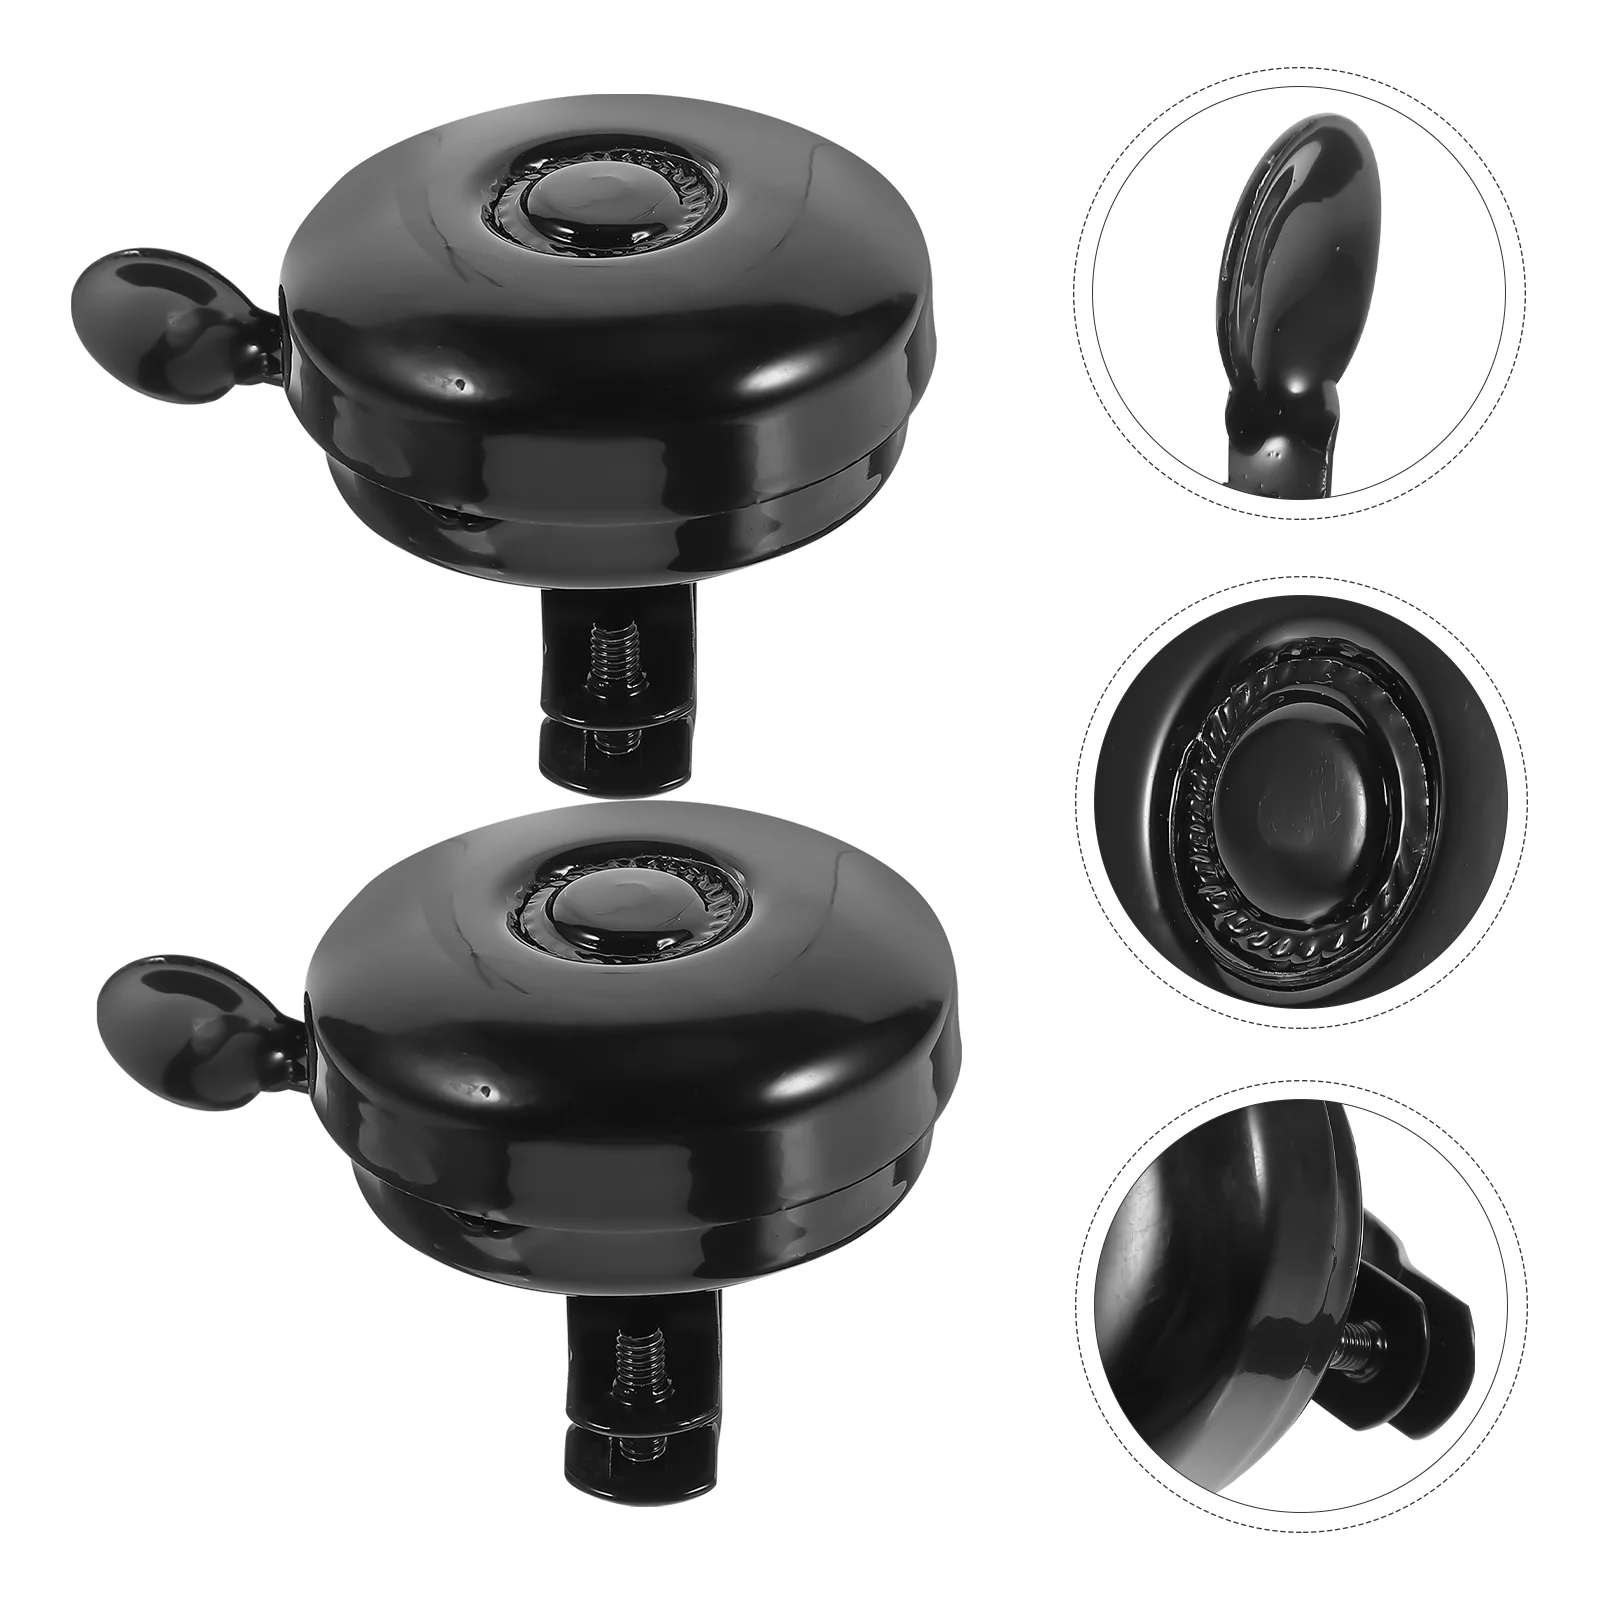 

2 Pcs Bike Bell Found Ring Anti-loss Cycling Convenient Ringing Bells Iron Portable Practical Finding Bicycles